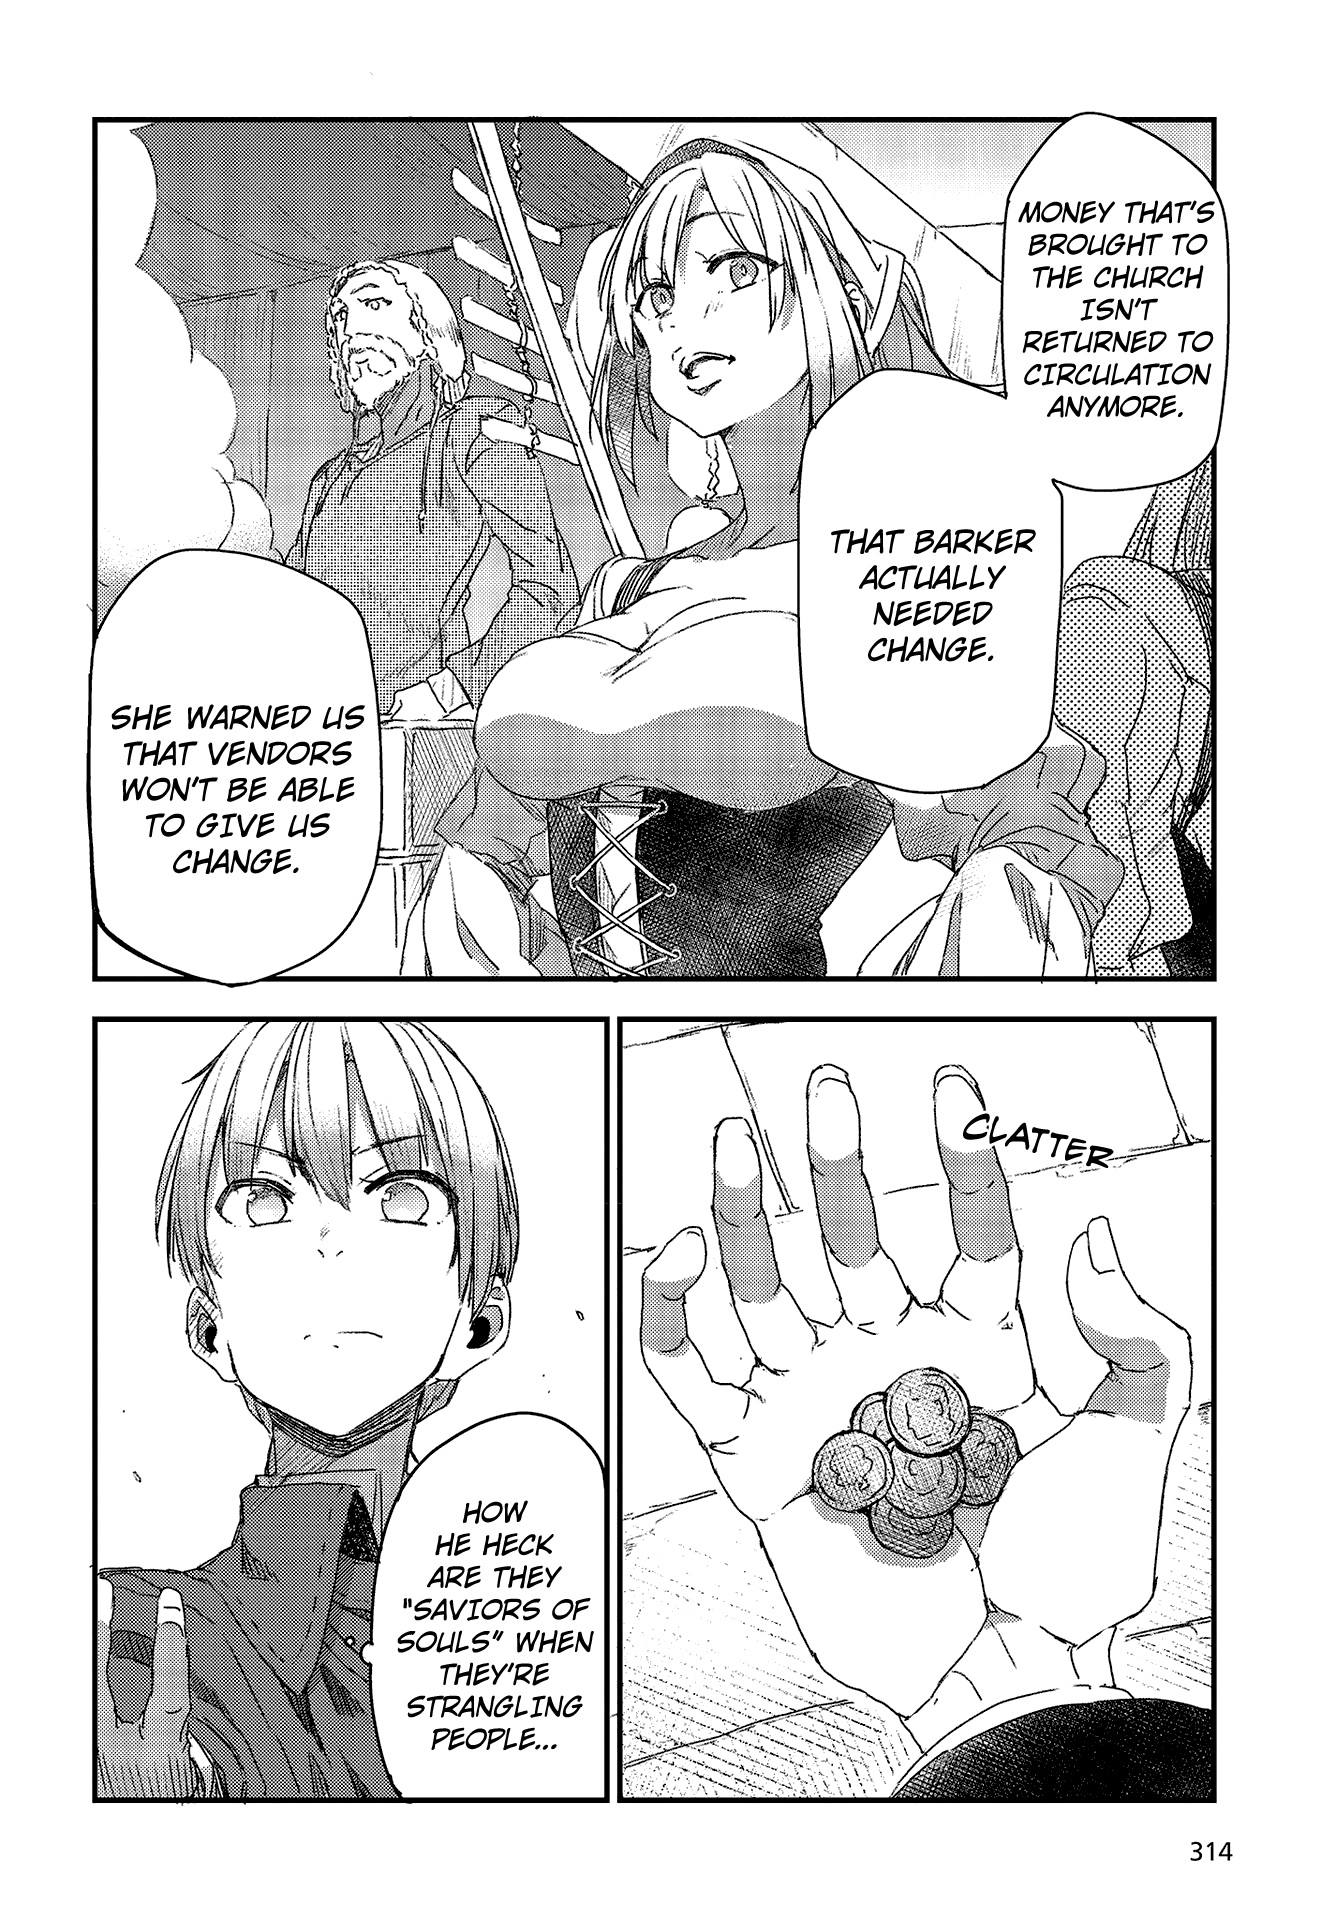 Wolf & Parchment: New Theory Spice & Wolf Chapter 4